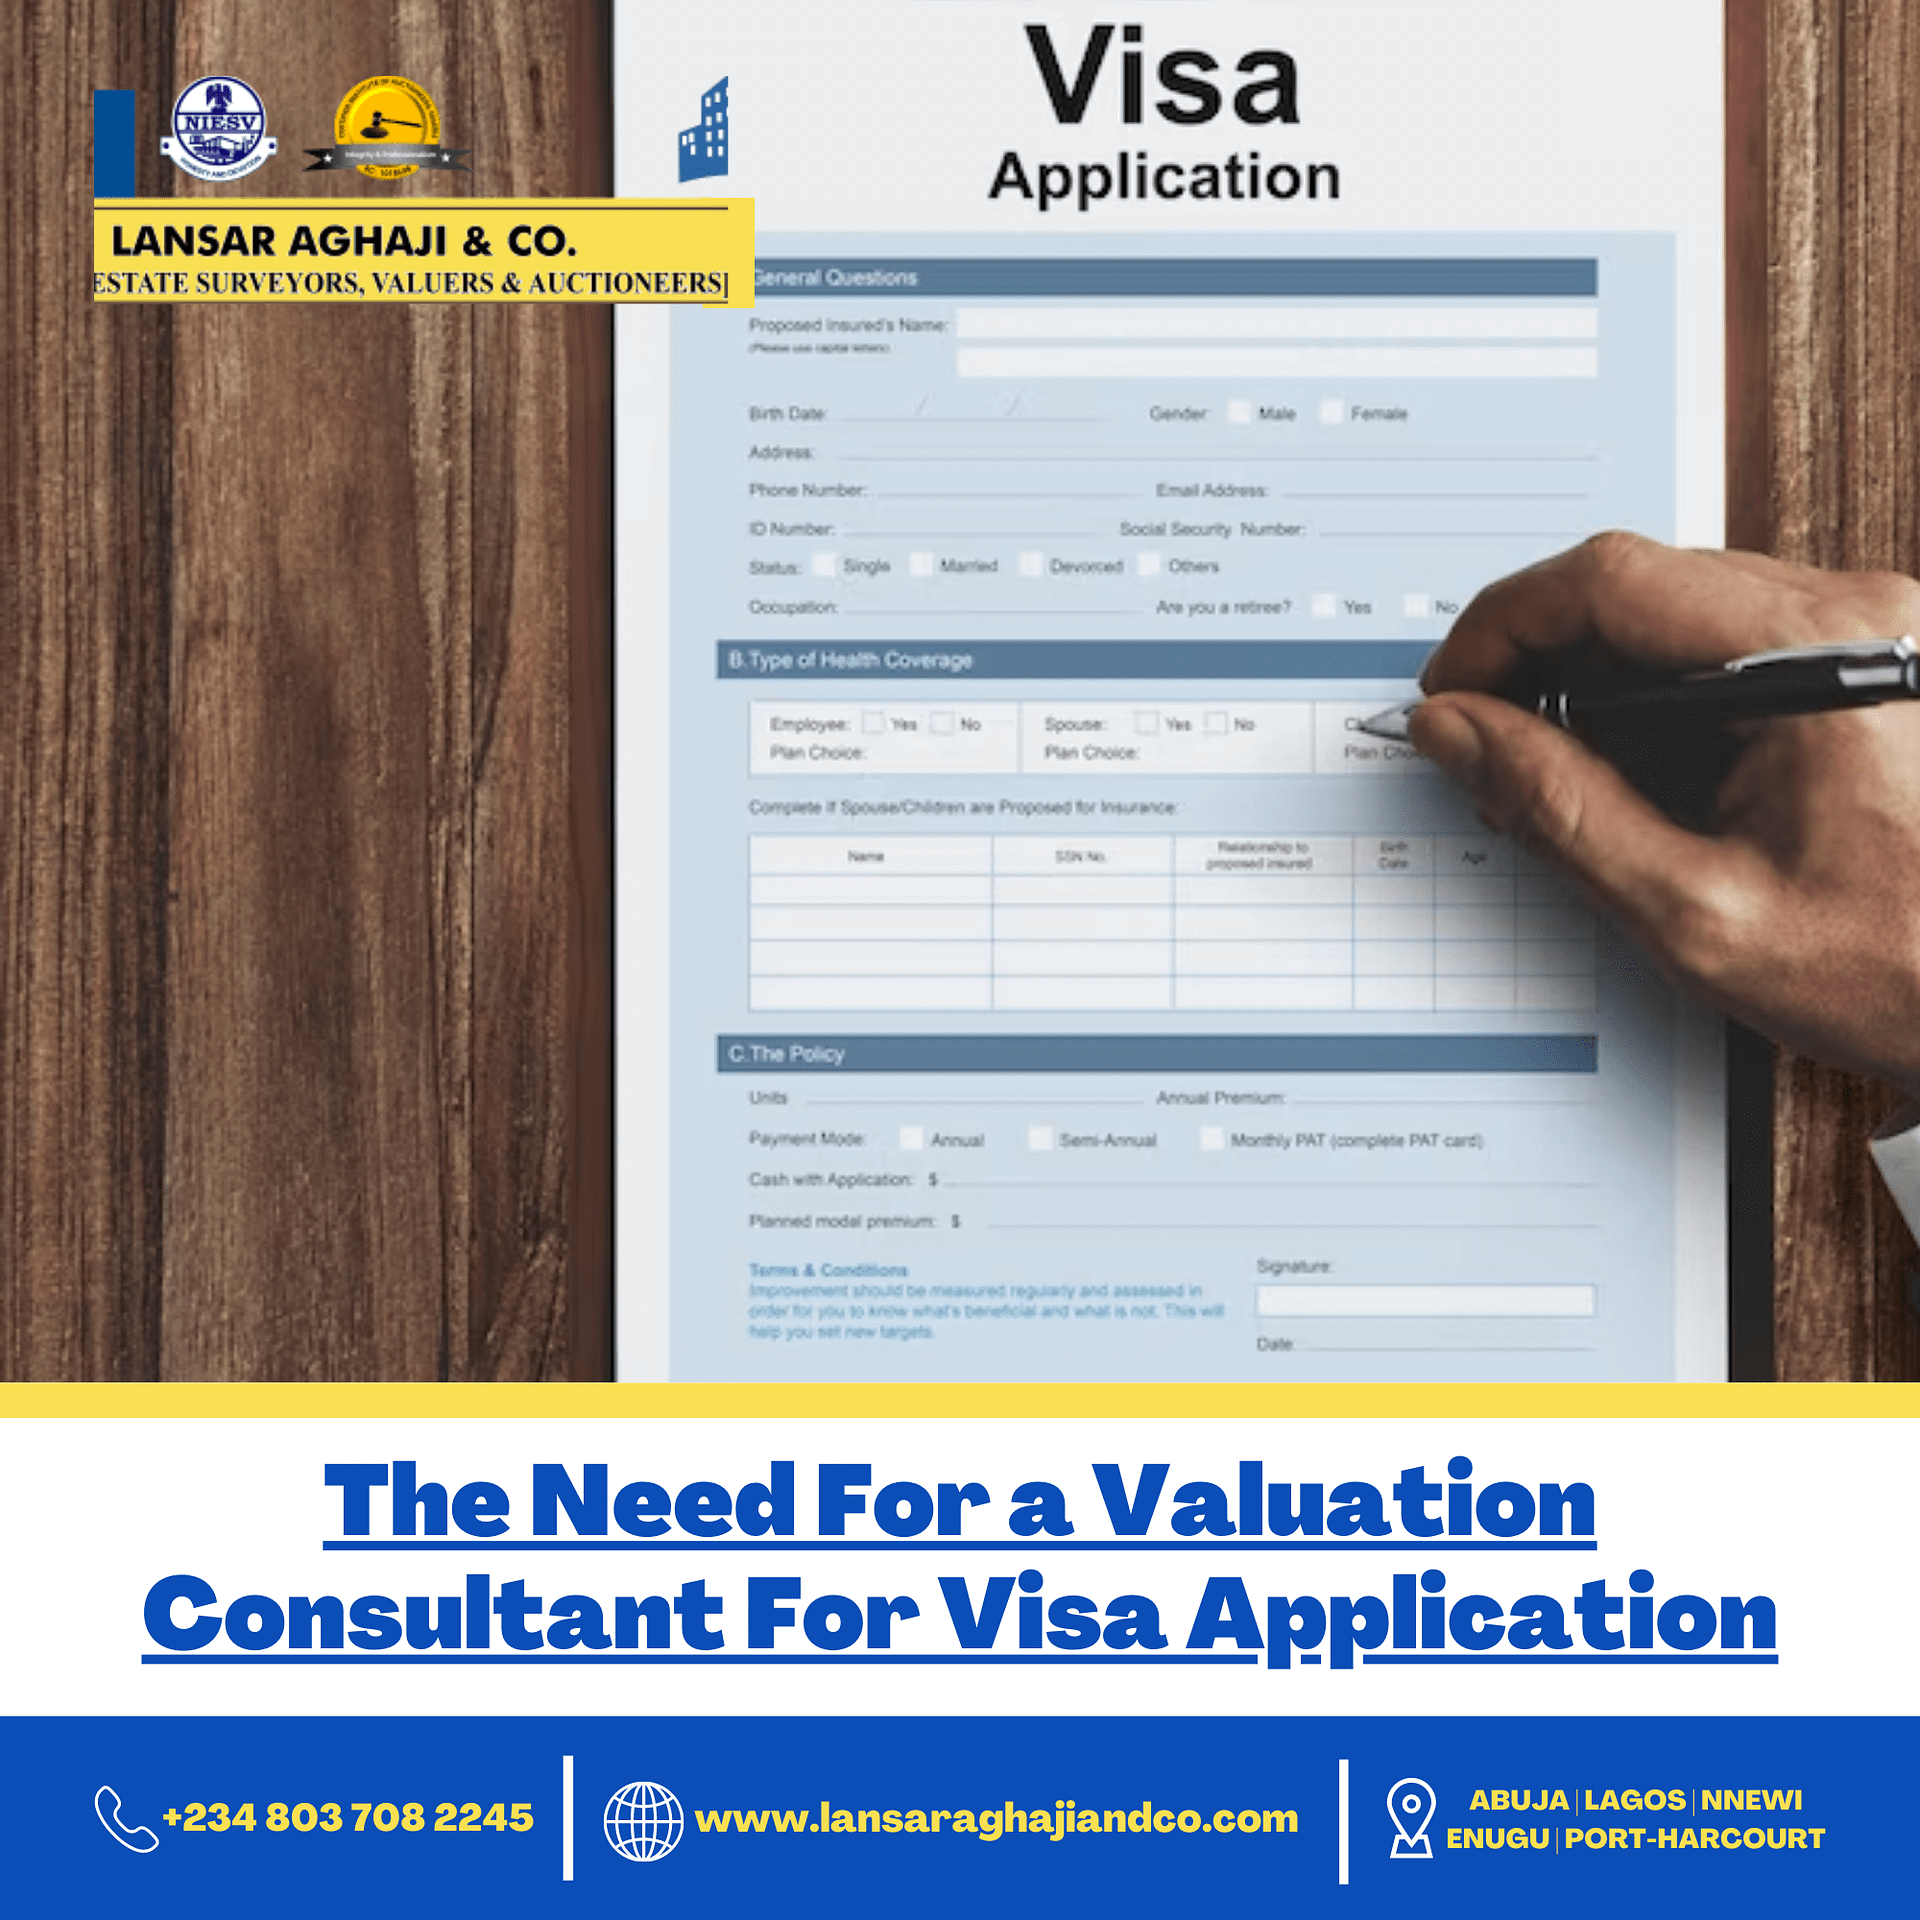 The Need for a Valuation Consultant for Visa Application